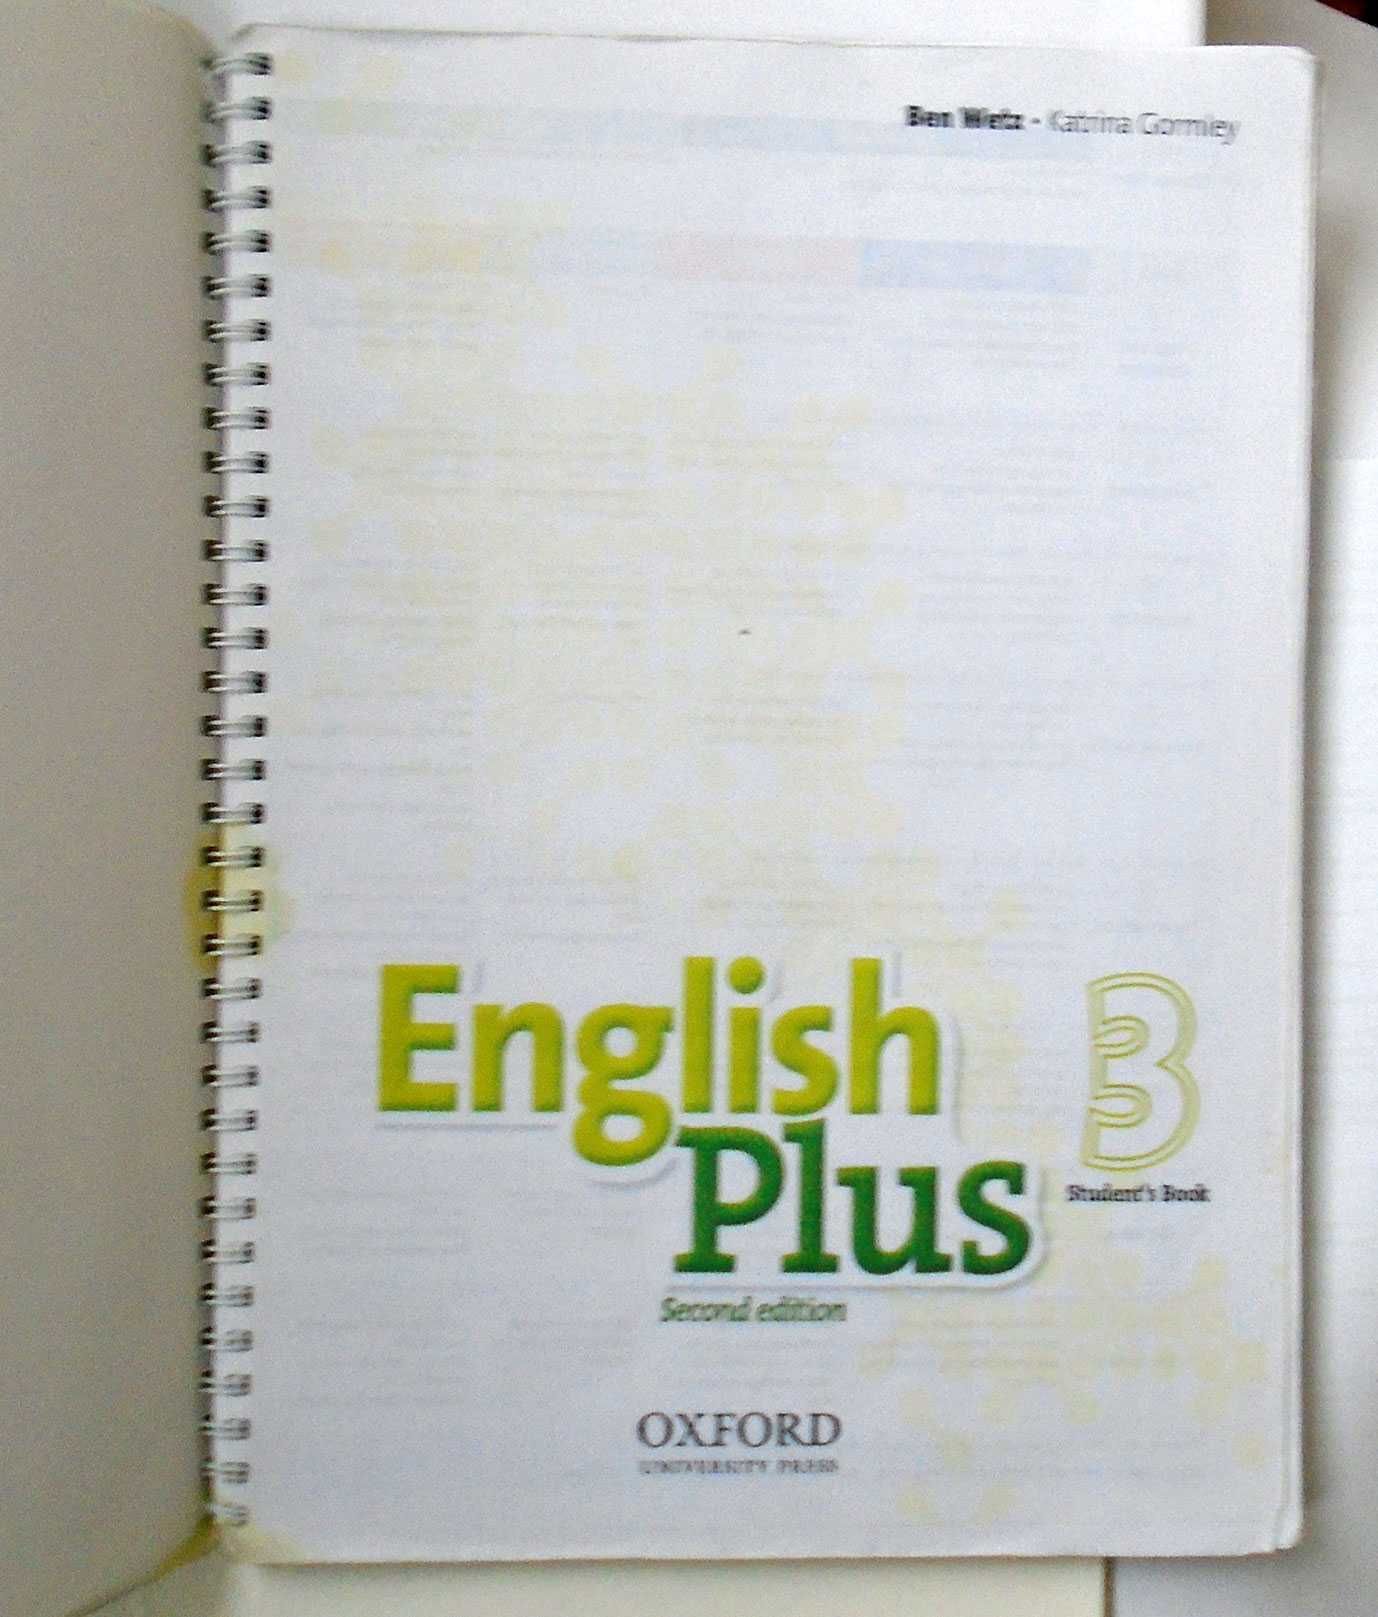 English Plus 3  Student's Book + Workbook ( second edition )